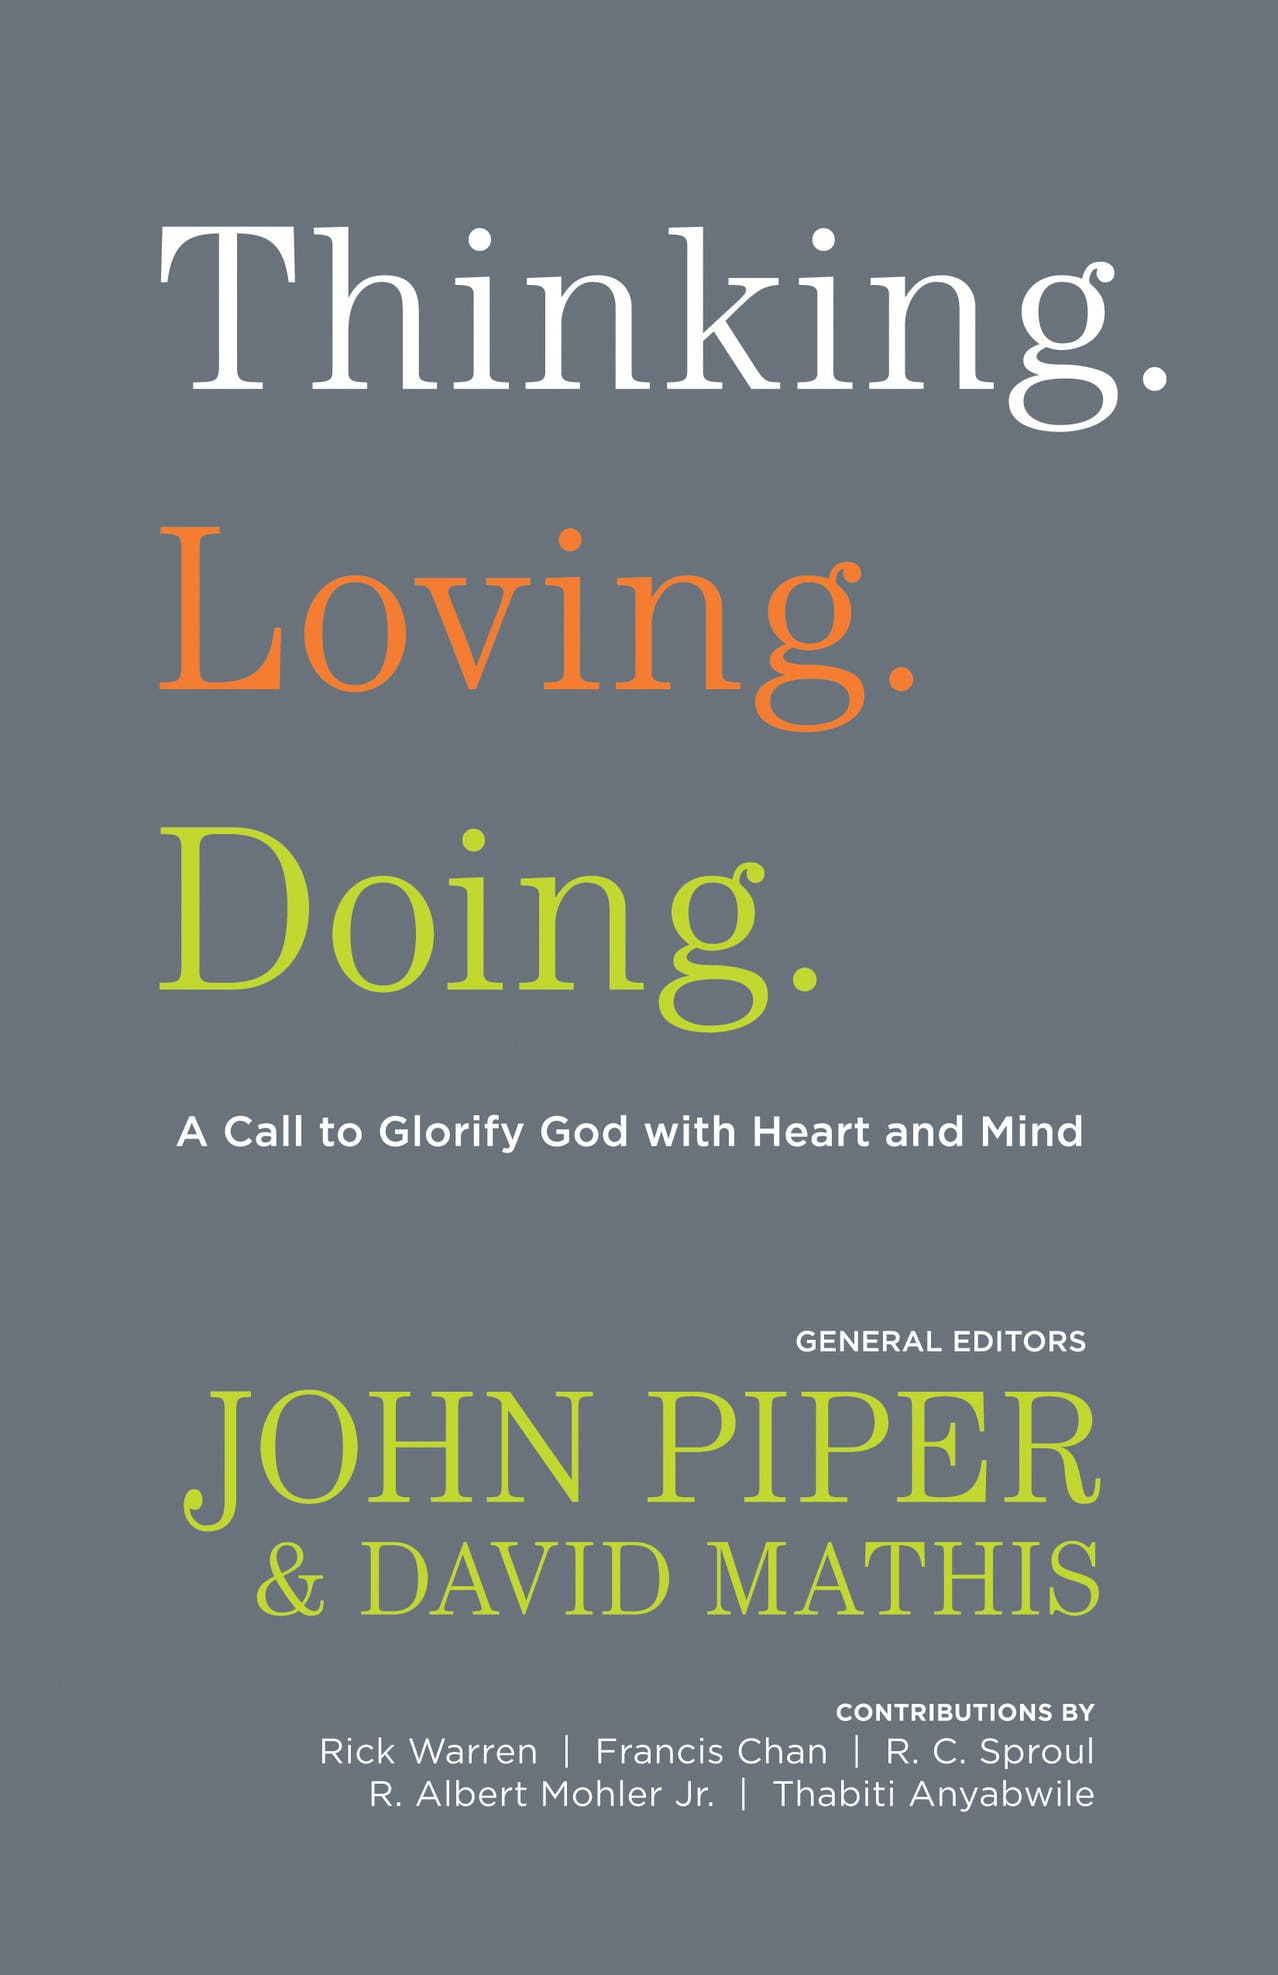 DOWNLOAD PDF: Thinking, Loving, Doing by John Piper 19